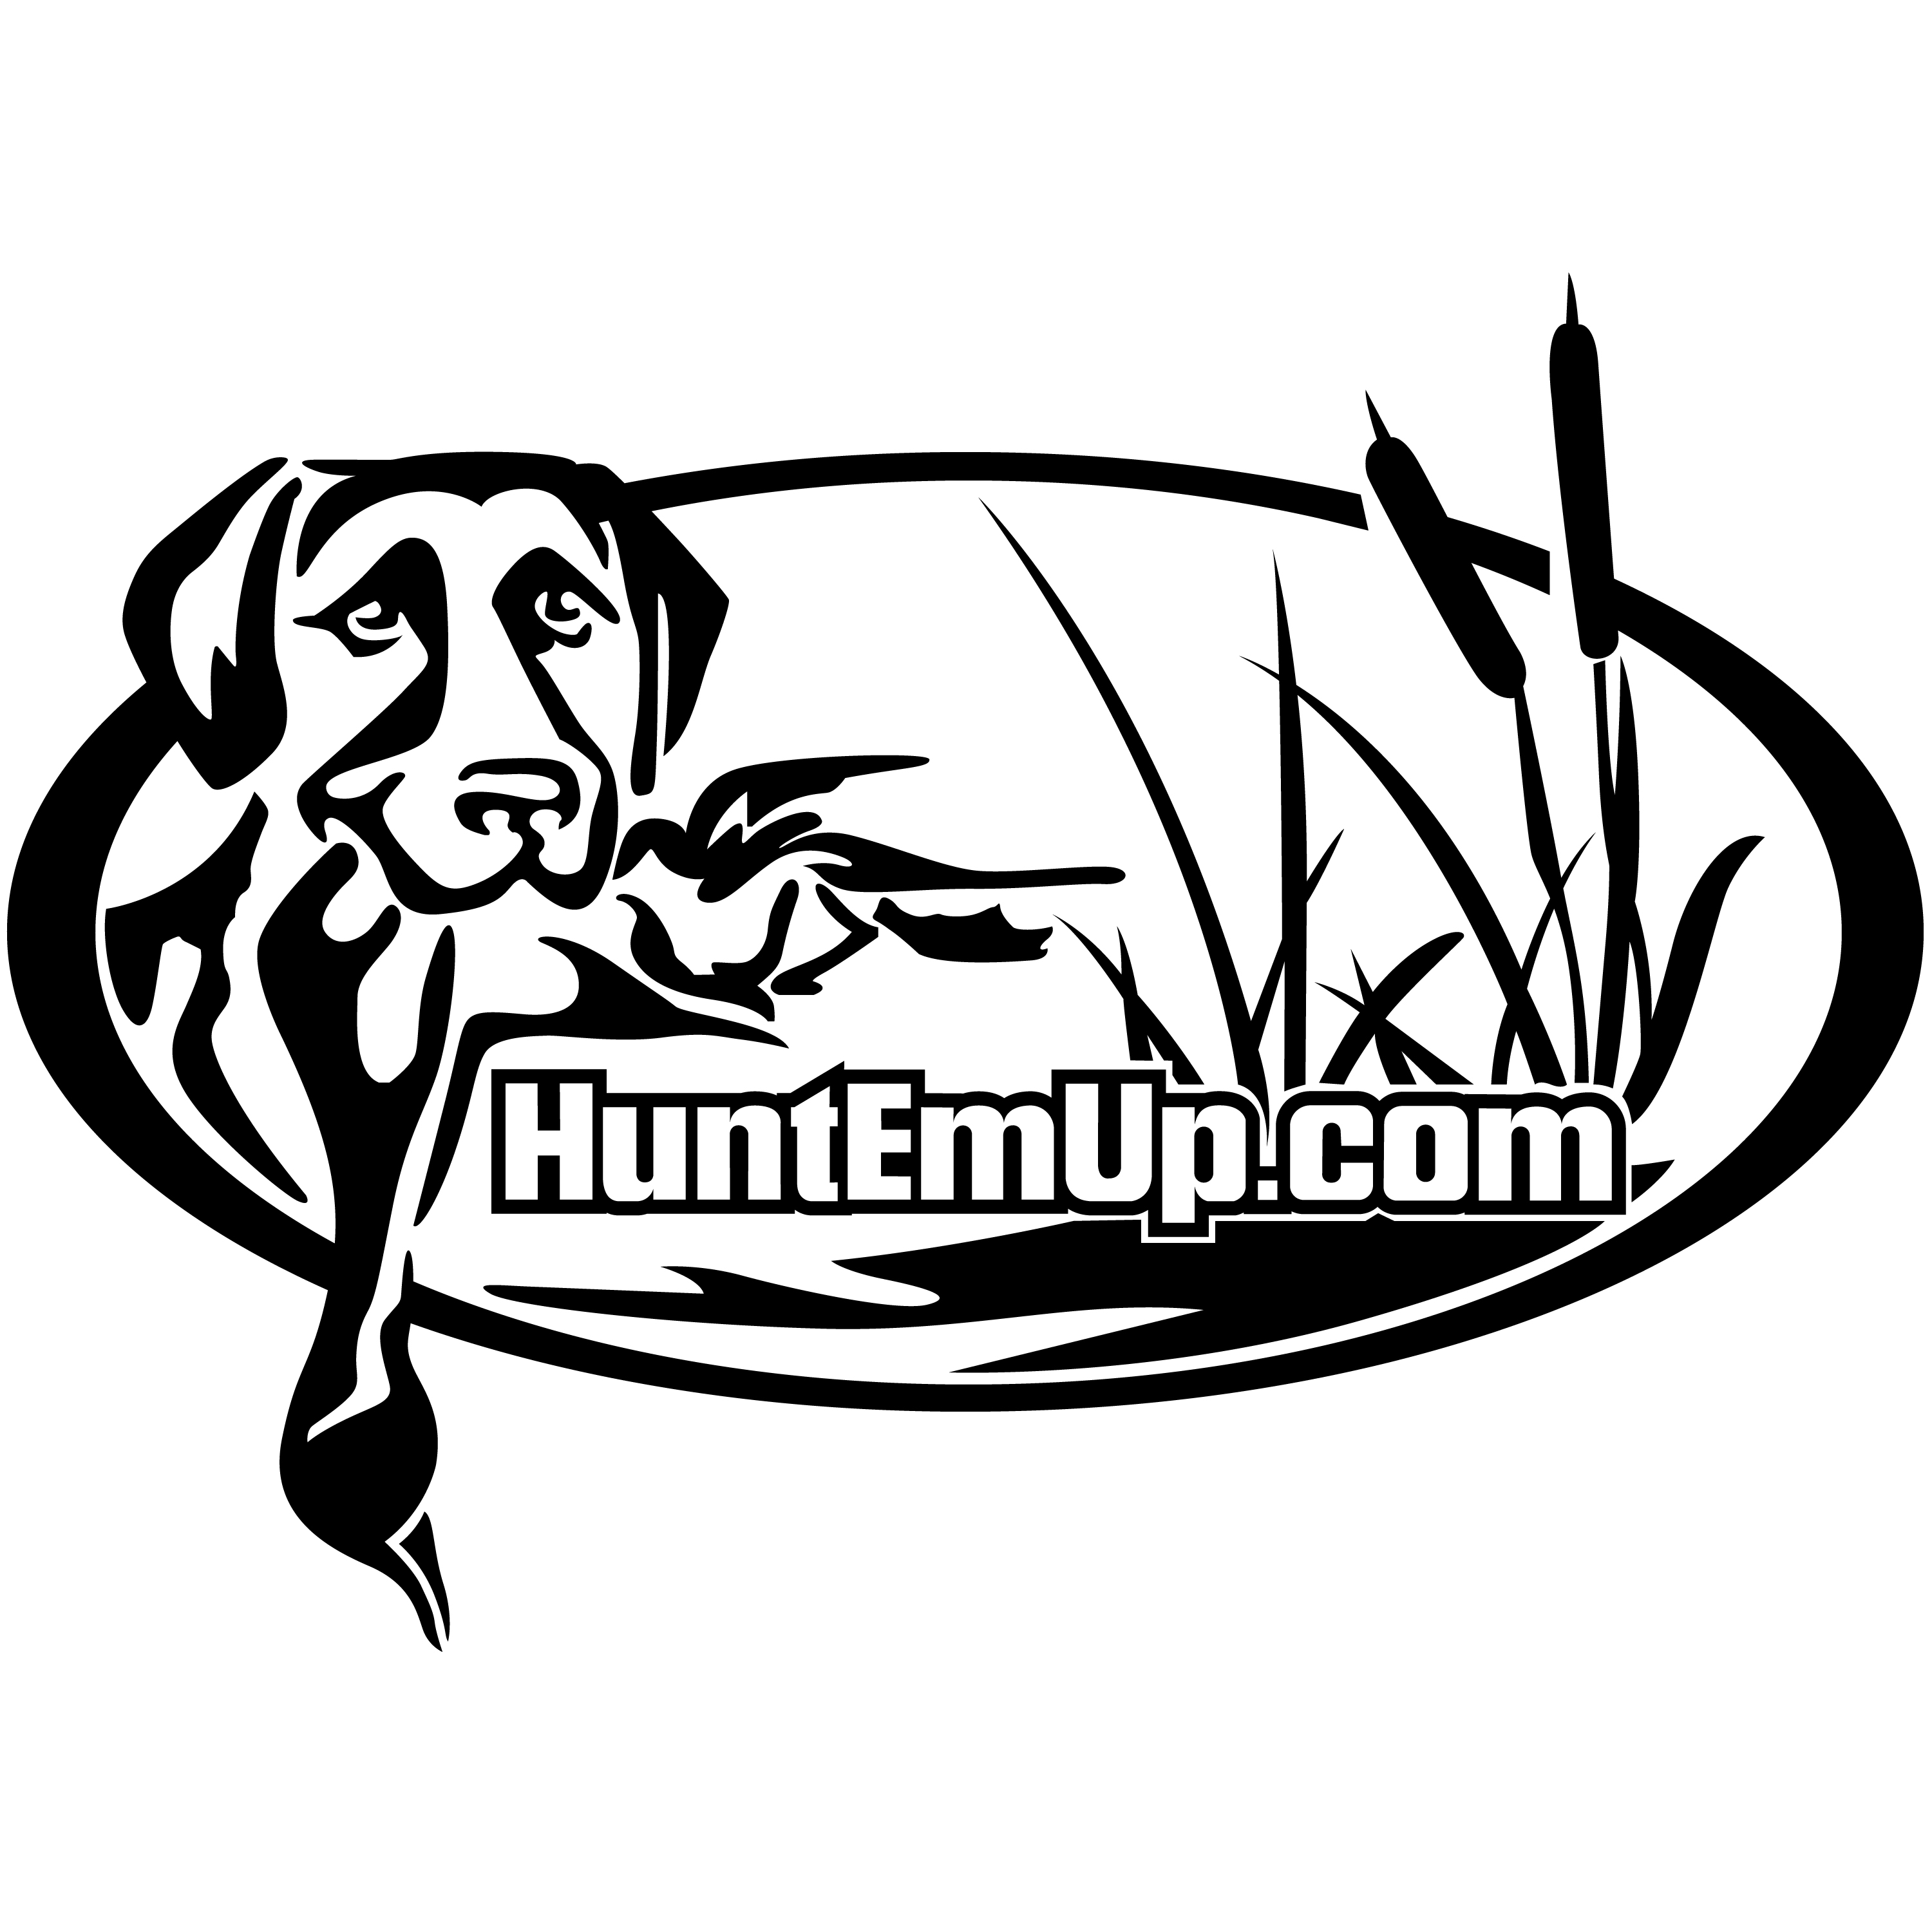 Online Sporting Dog Supply Retailer Launches New Product Offering Expanding Its Offering to Sportsman